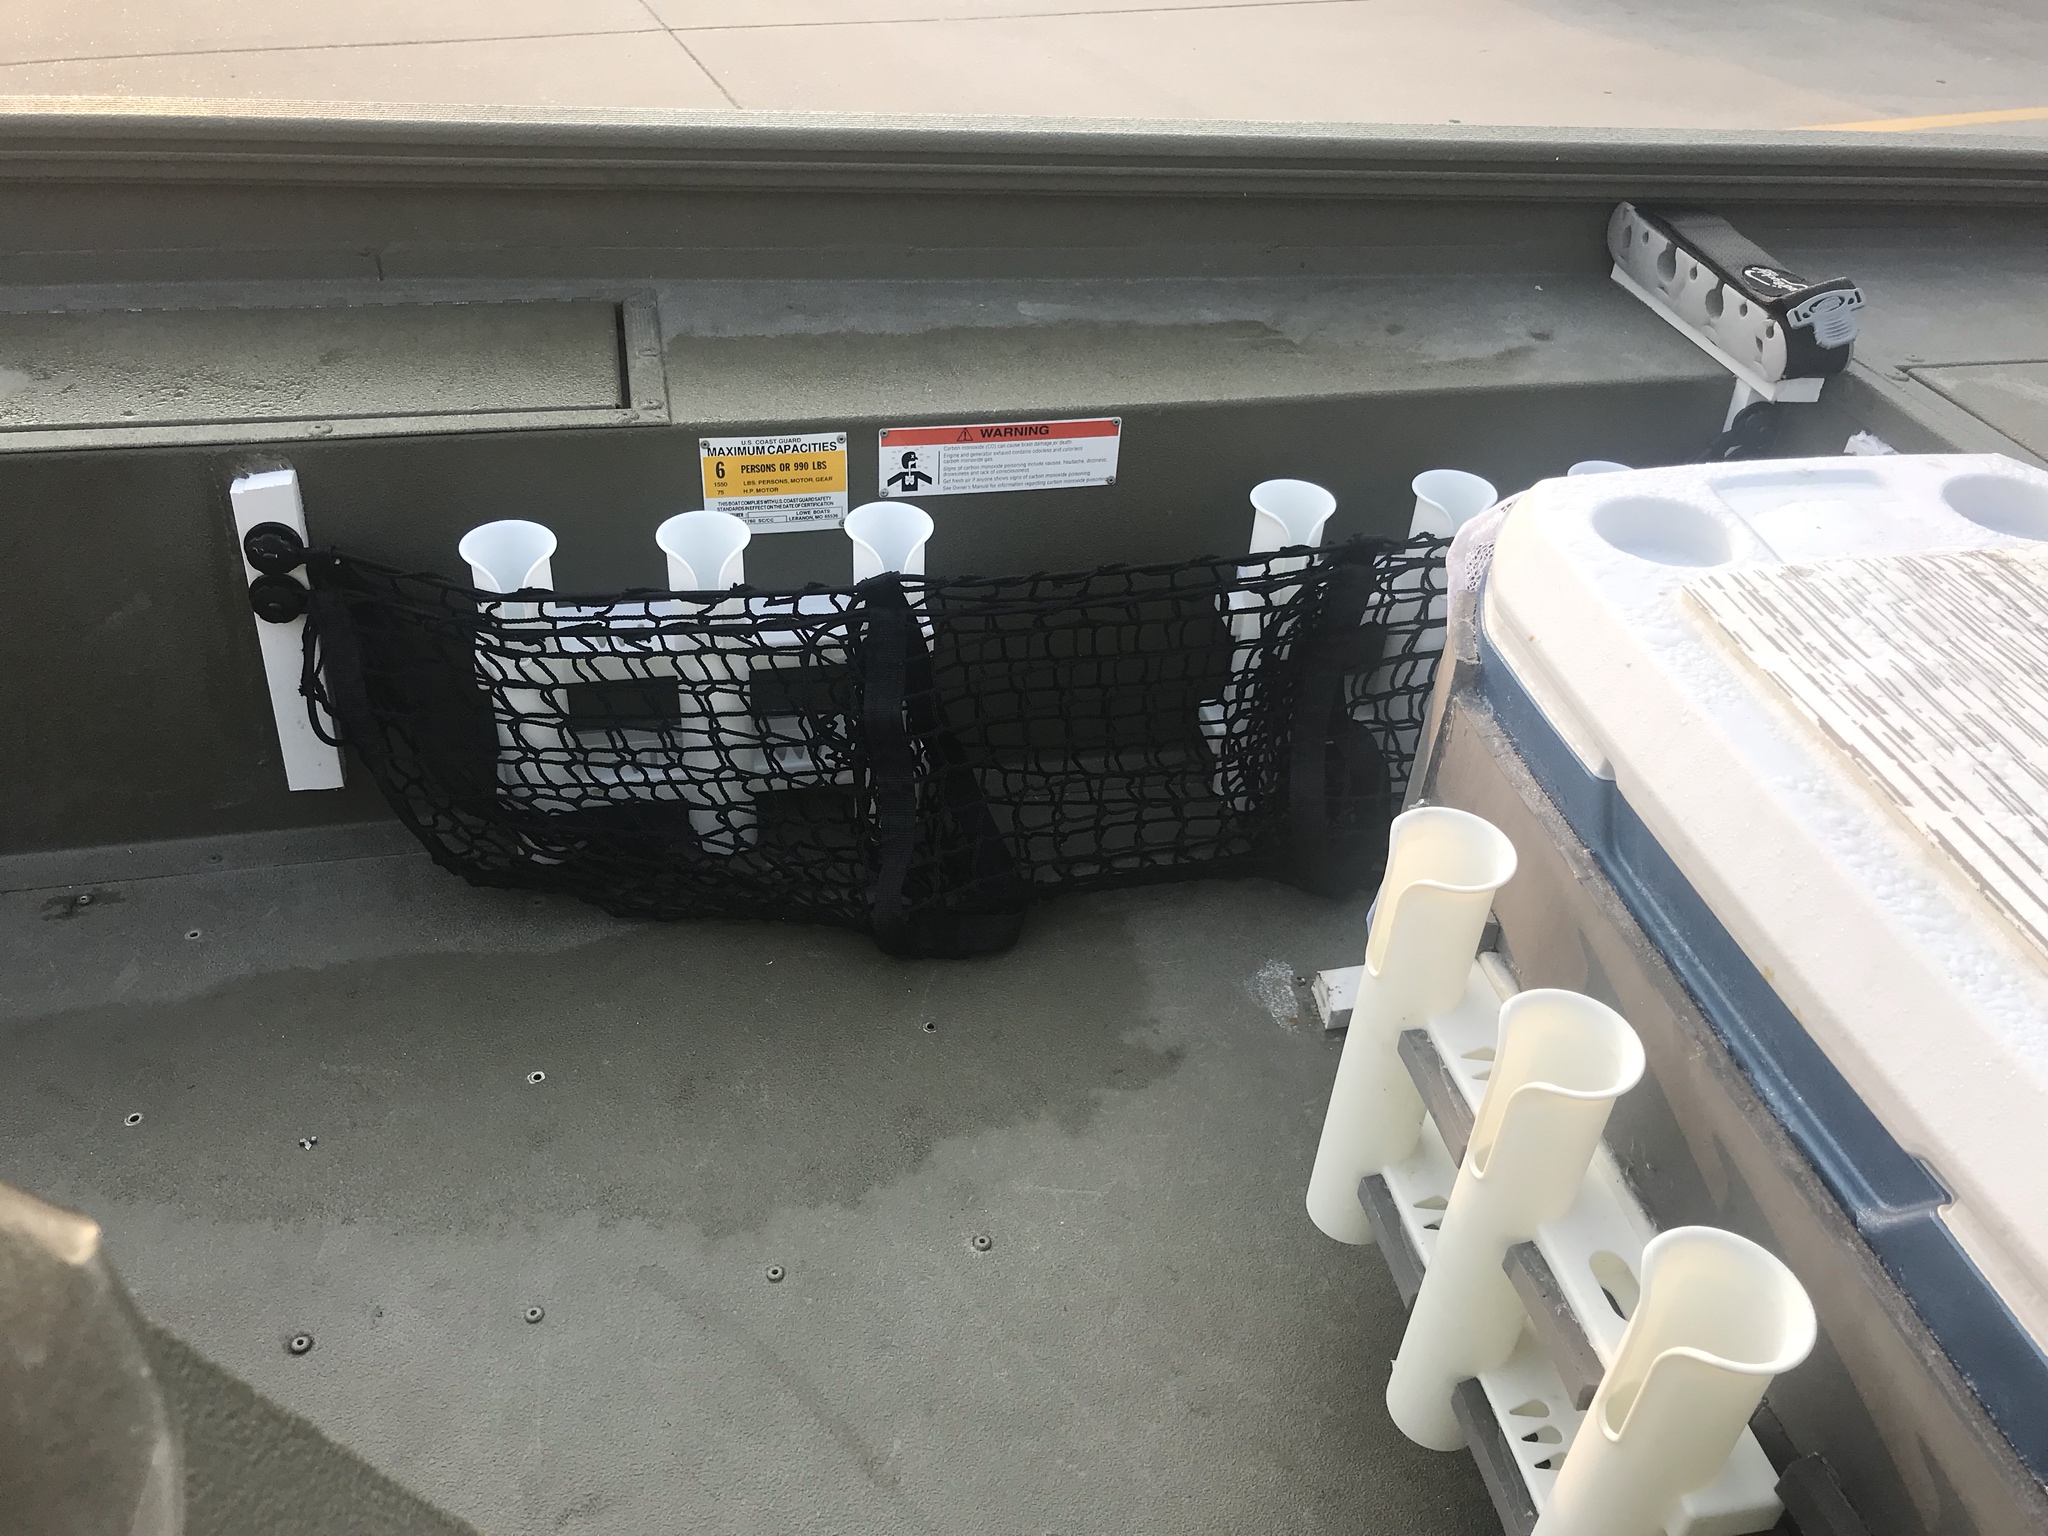 Storage solutions for a 14' boat?